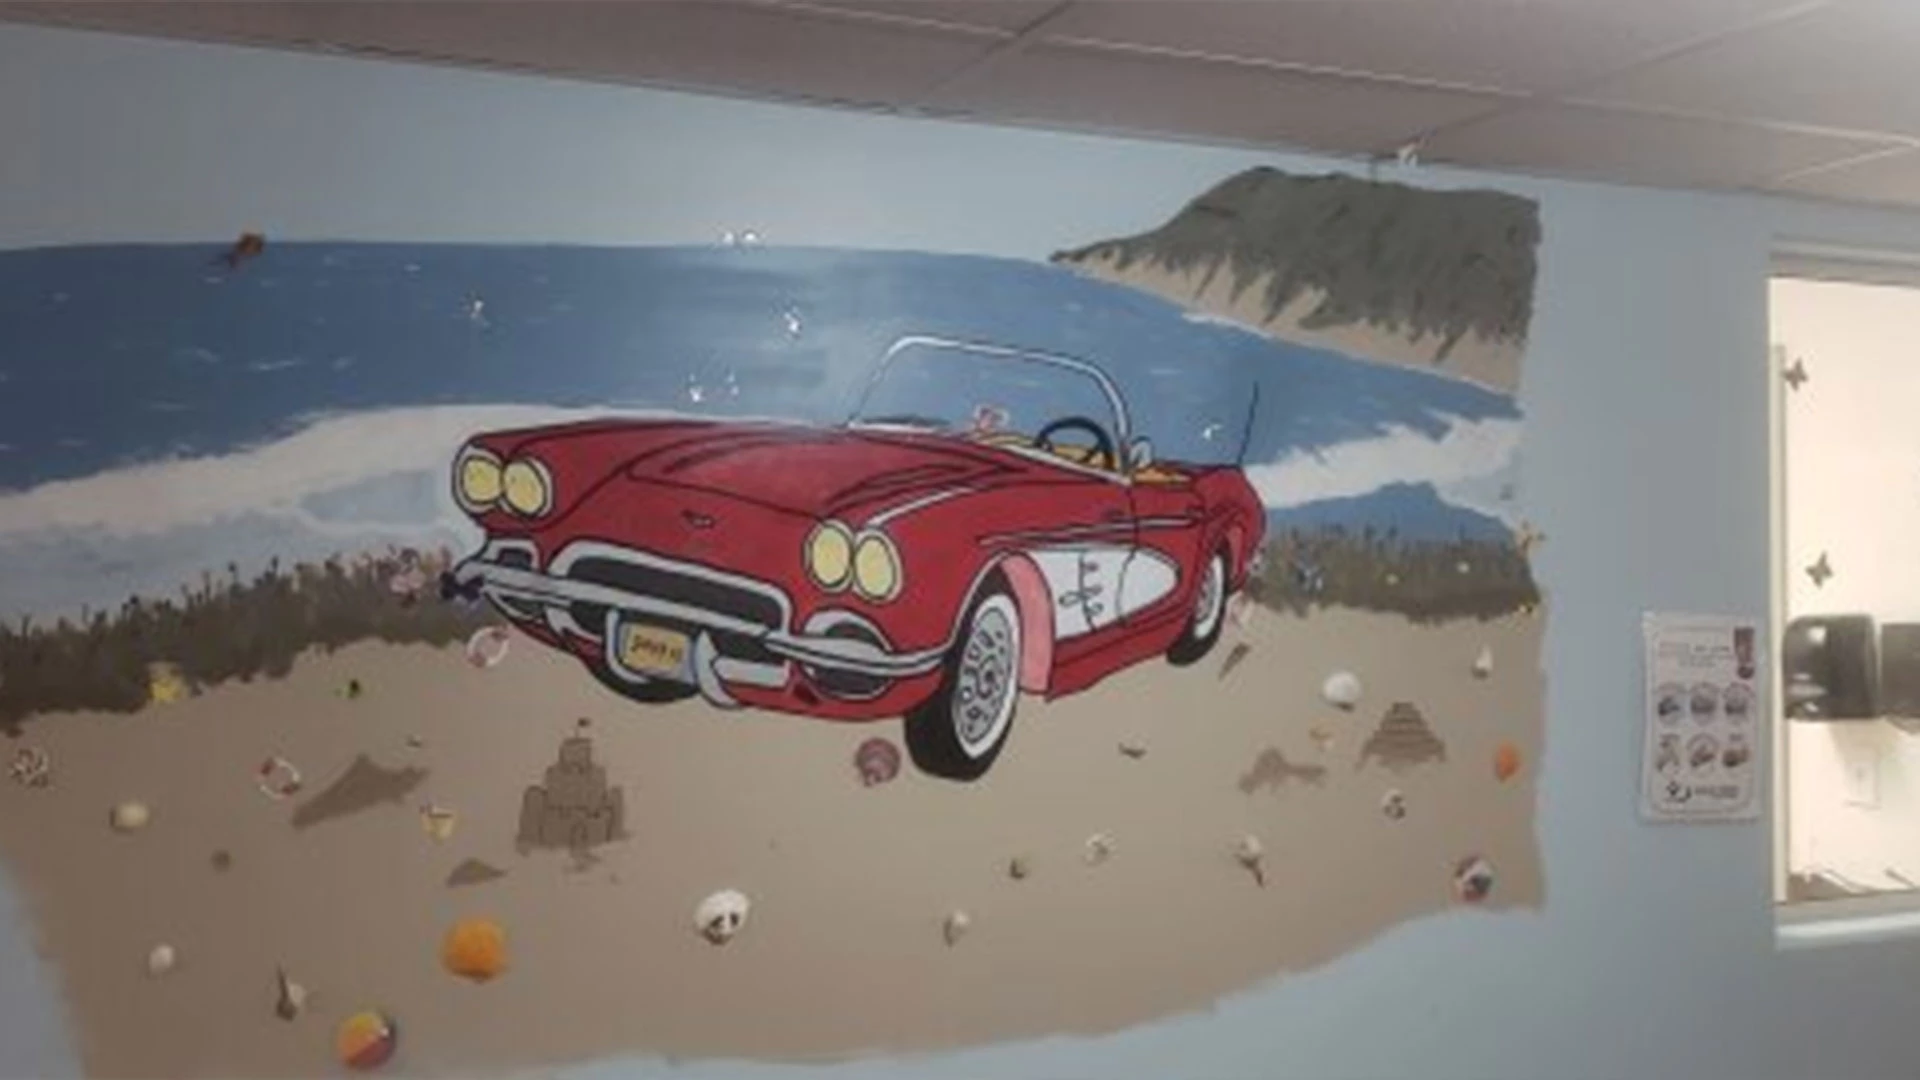 Painting of an old corvette on the wall